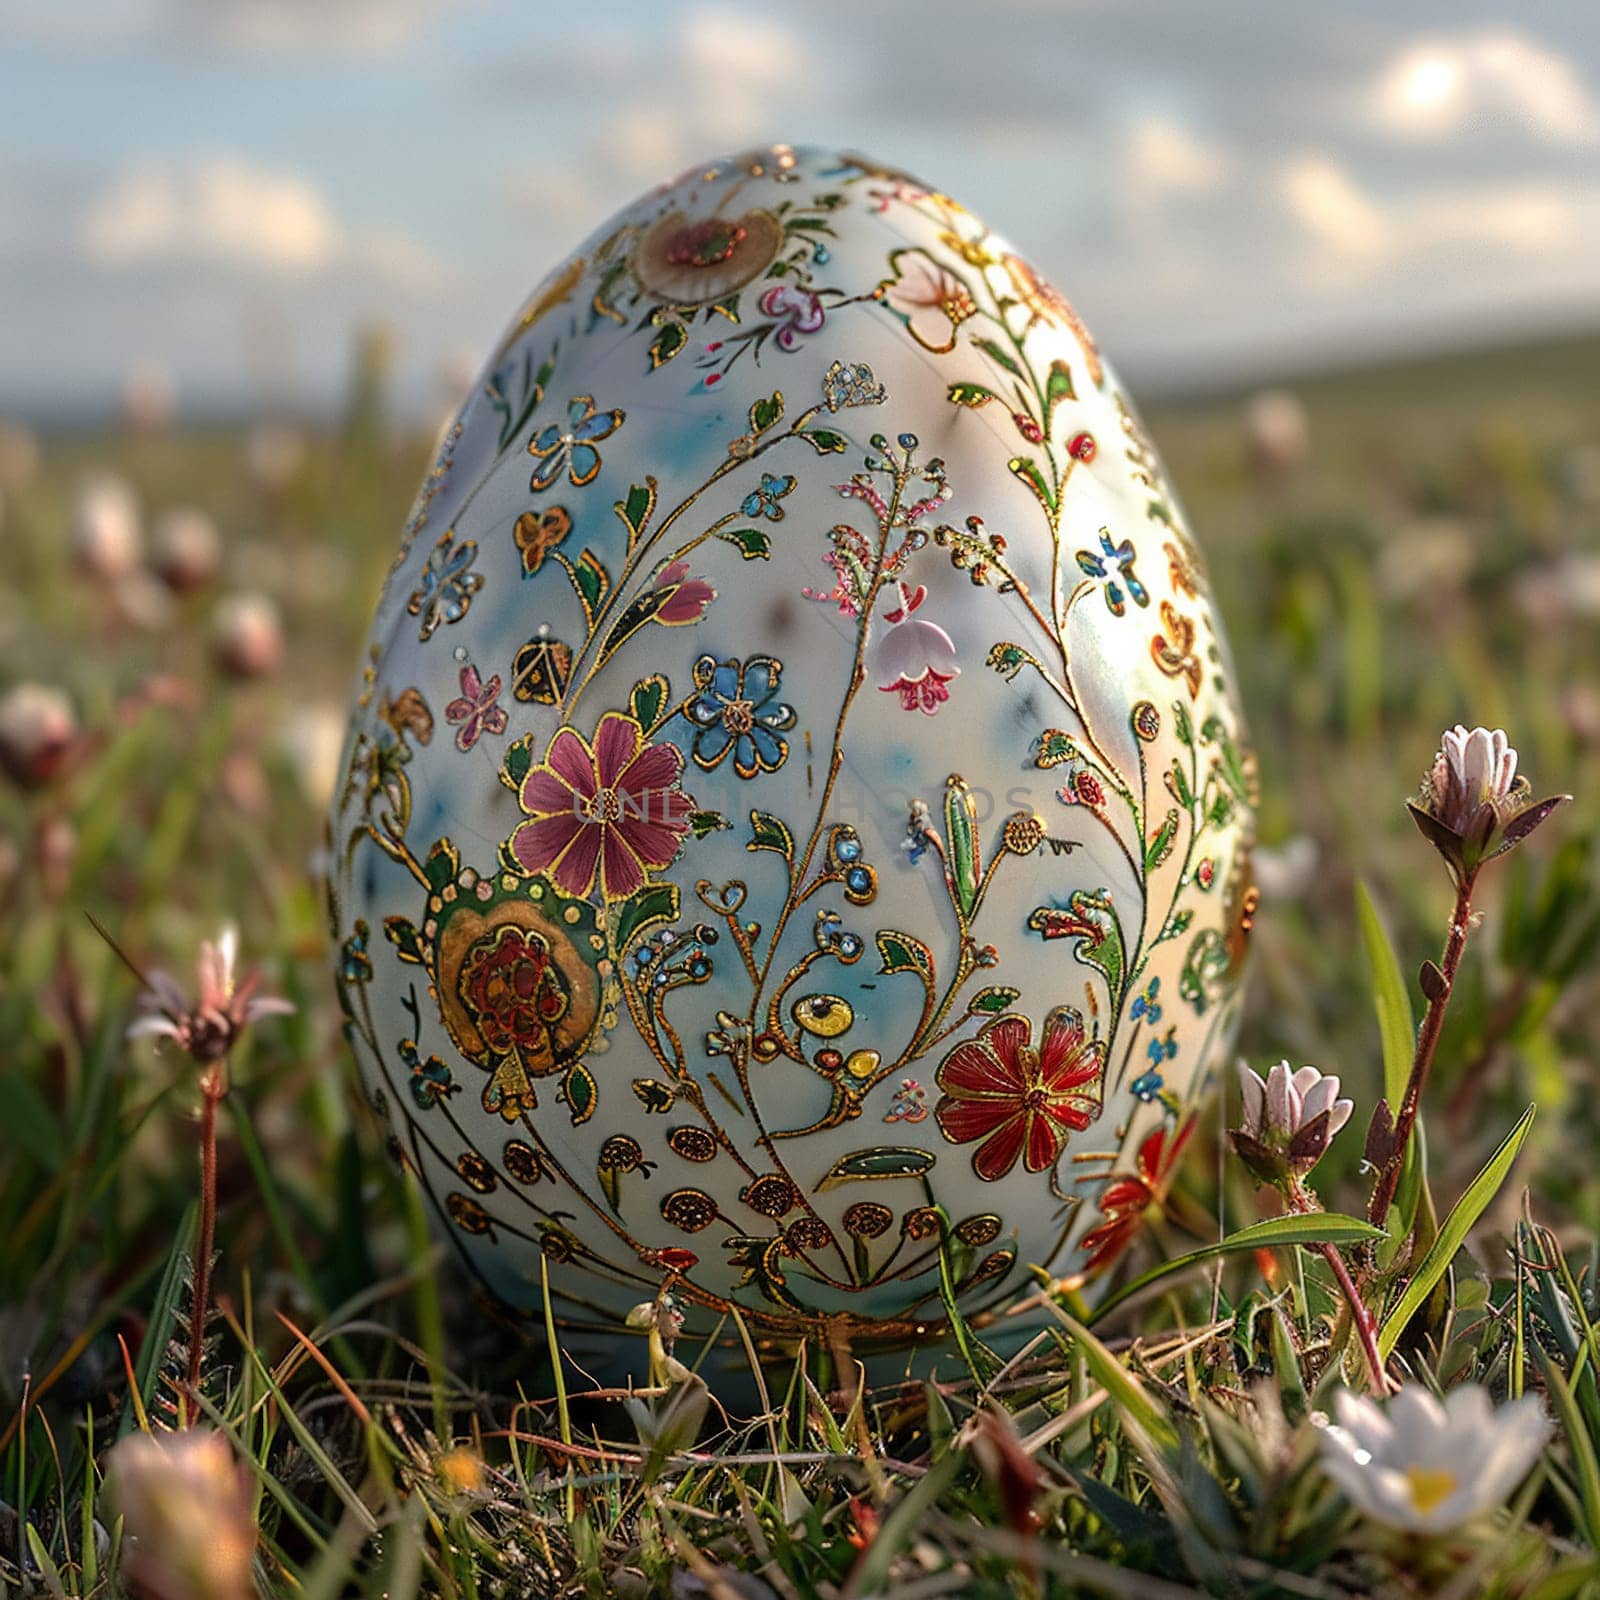 Single, intricately decorated Easter egg on bed of spring grass.